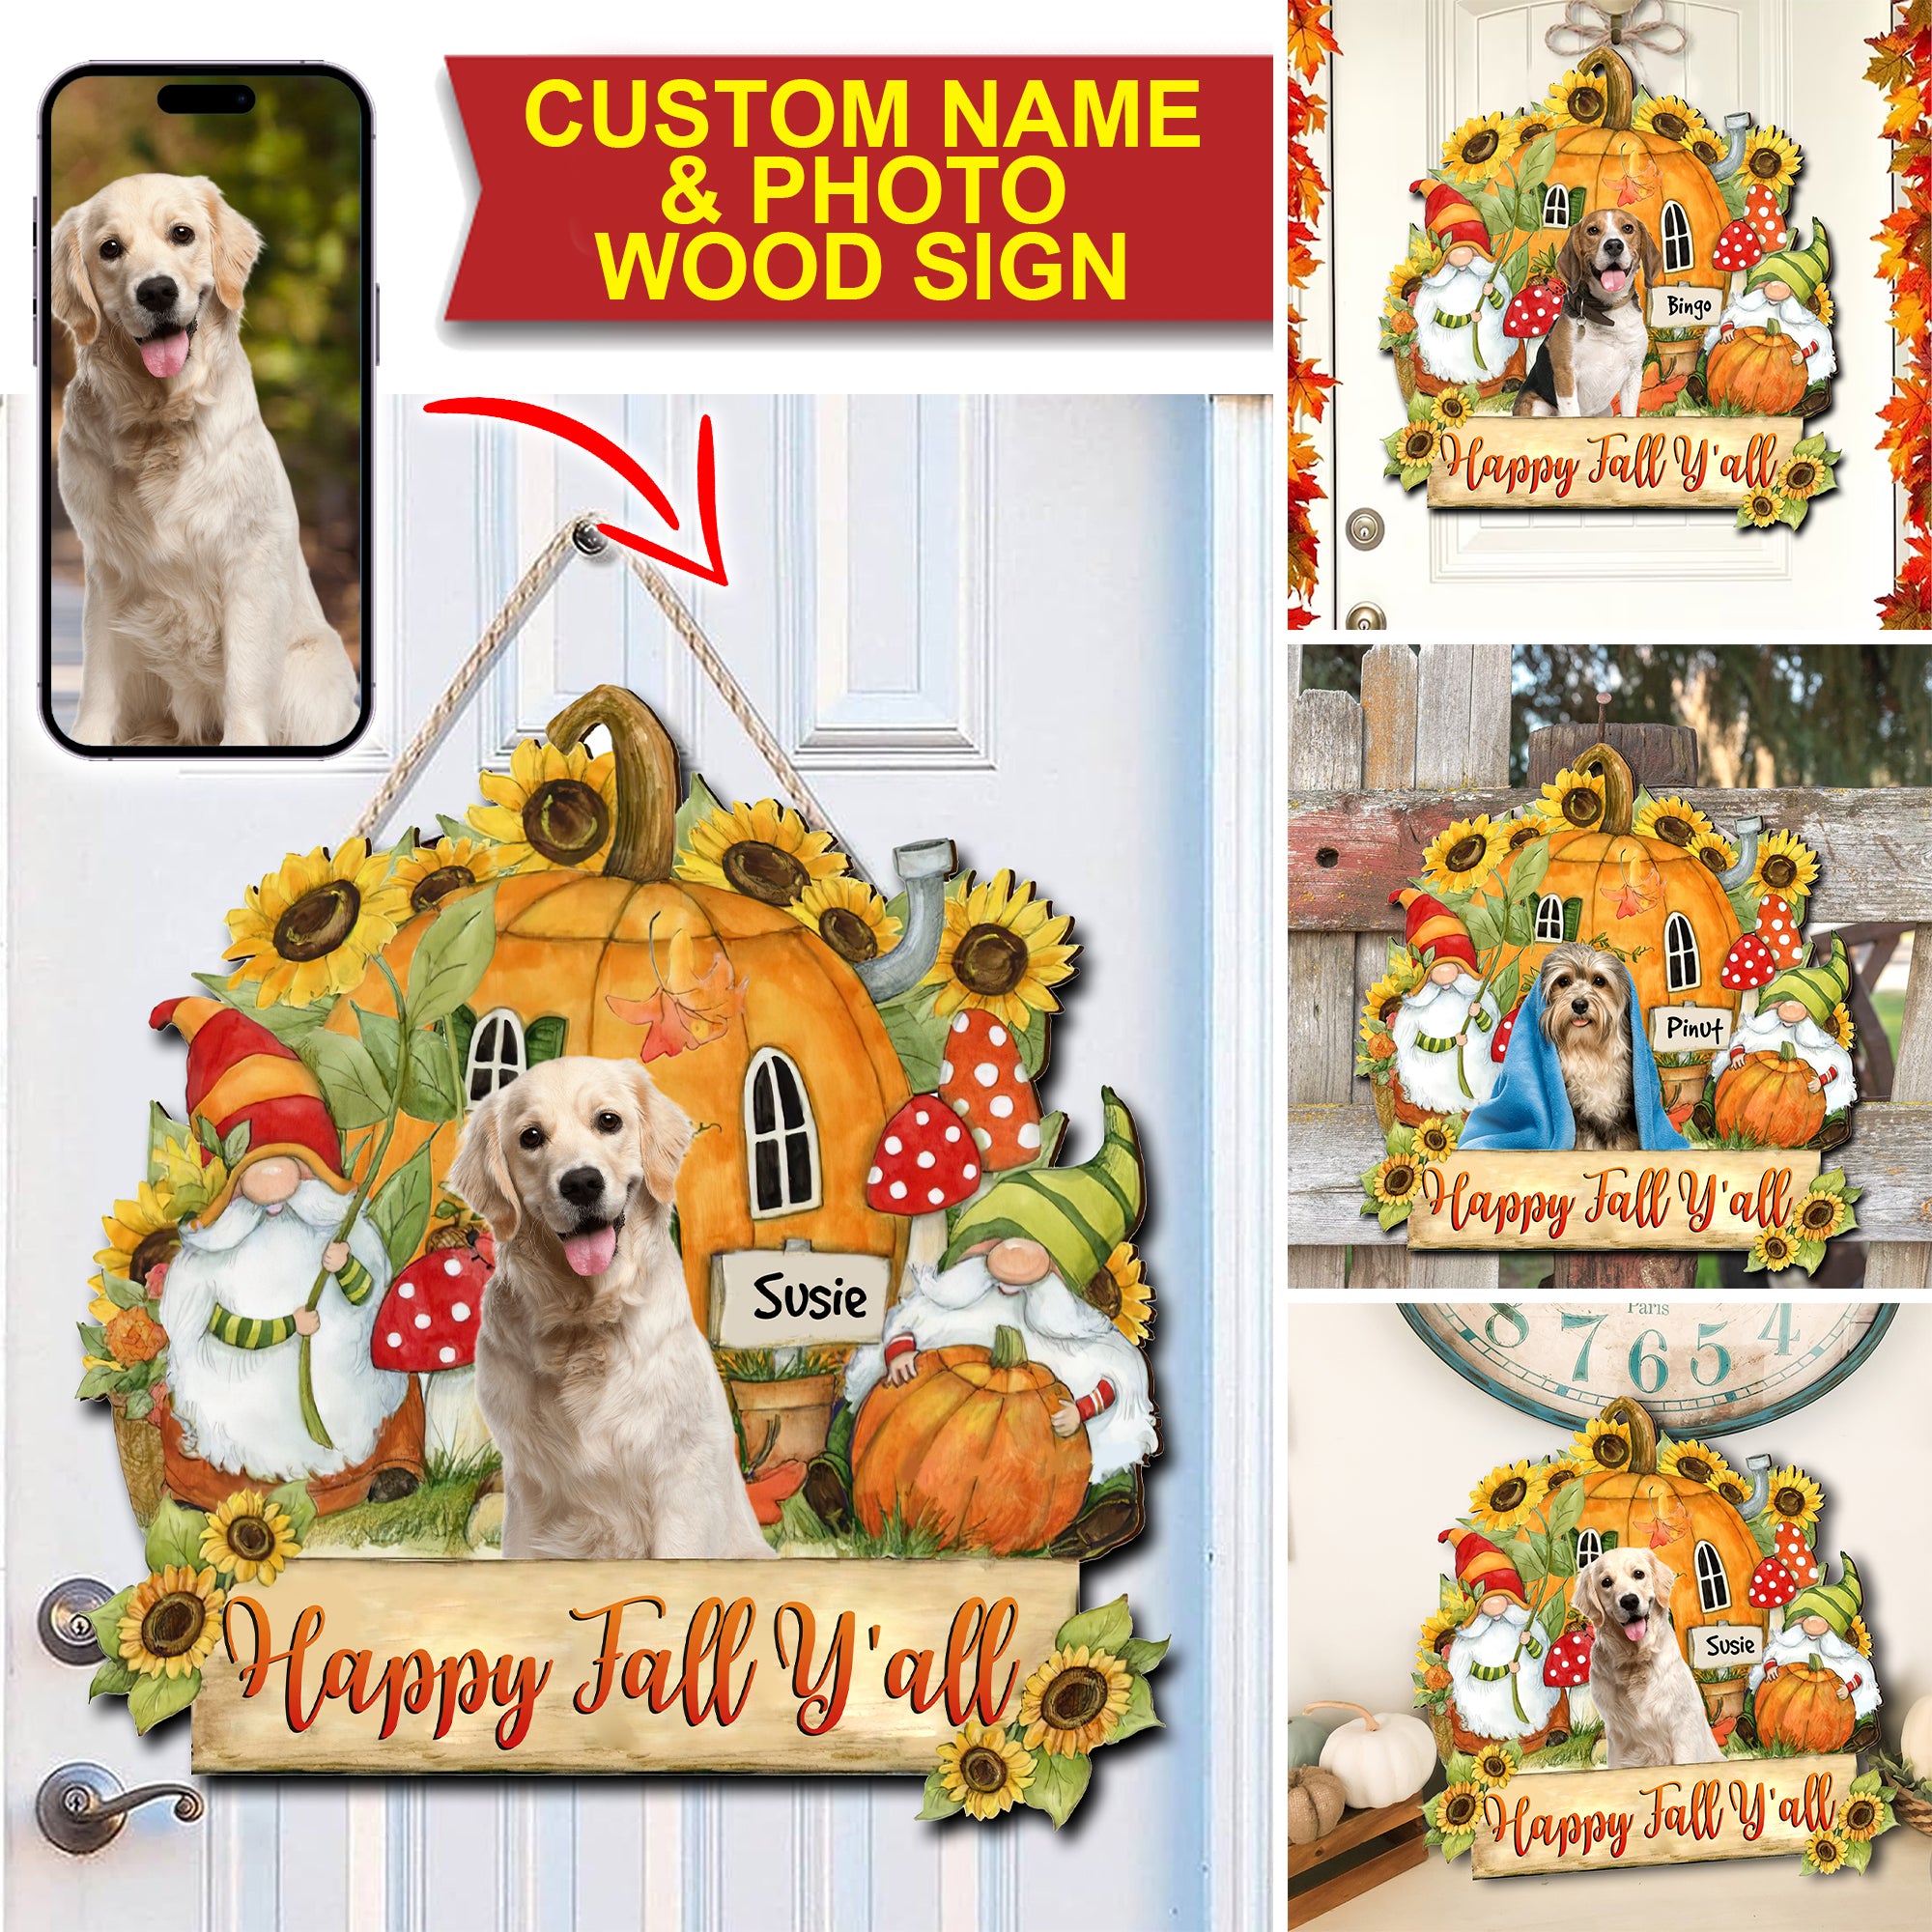 Happy Fall Y'all - Personalized Photo Wooden Door Sign - Halloween For Pets - Halloween Gift